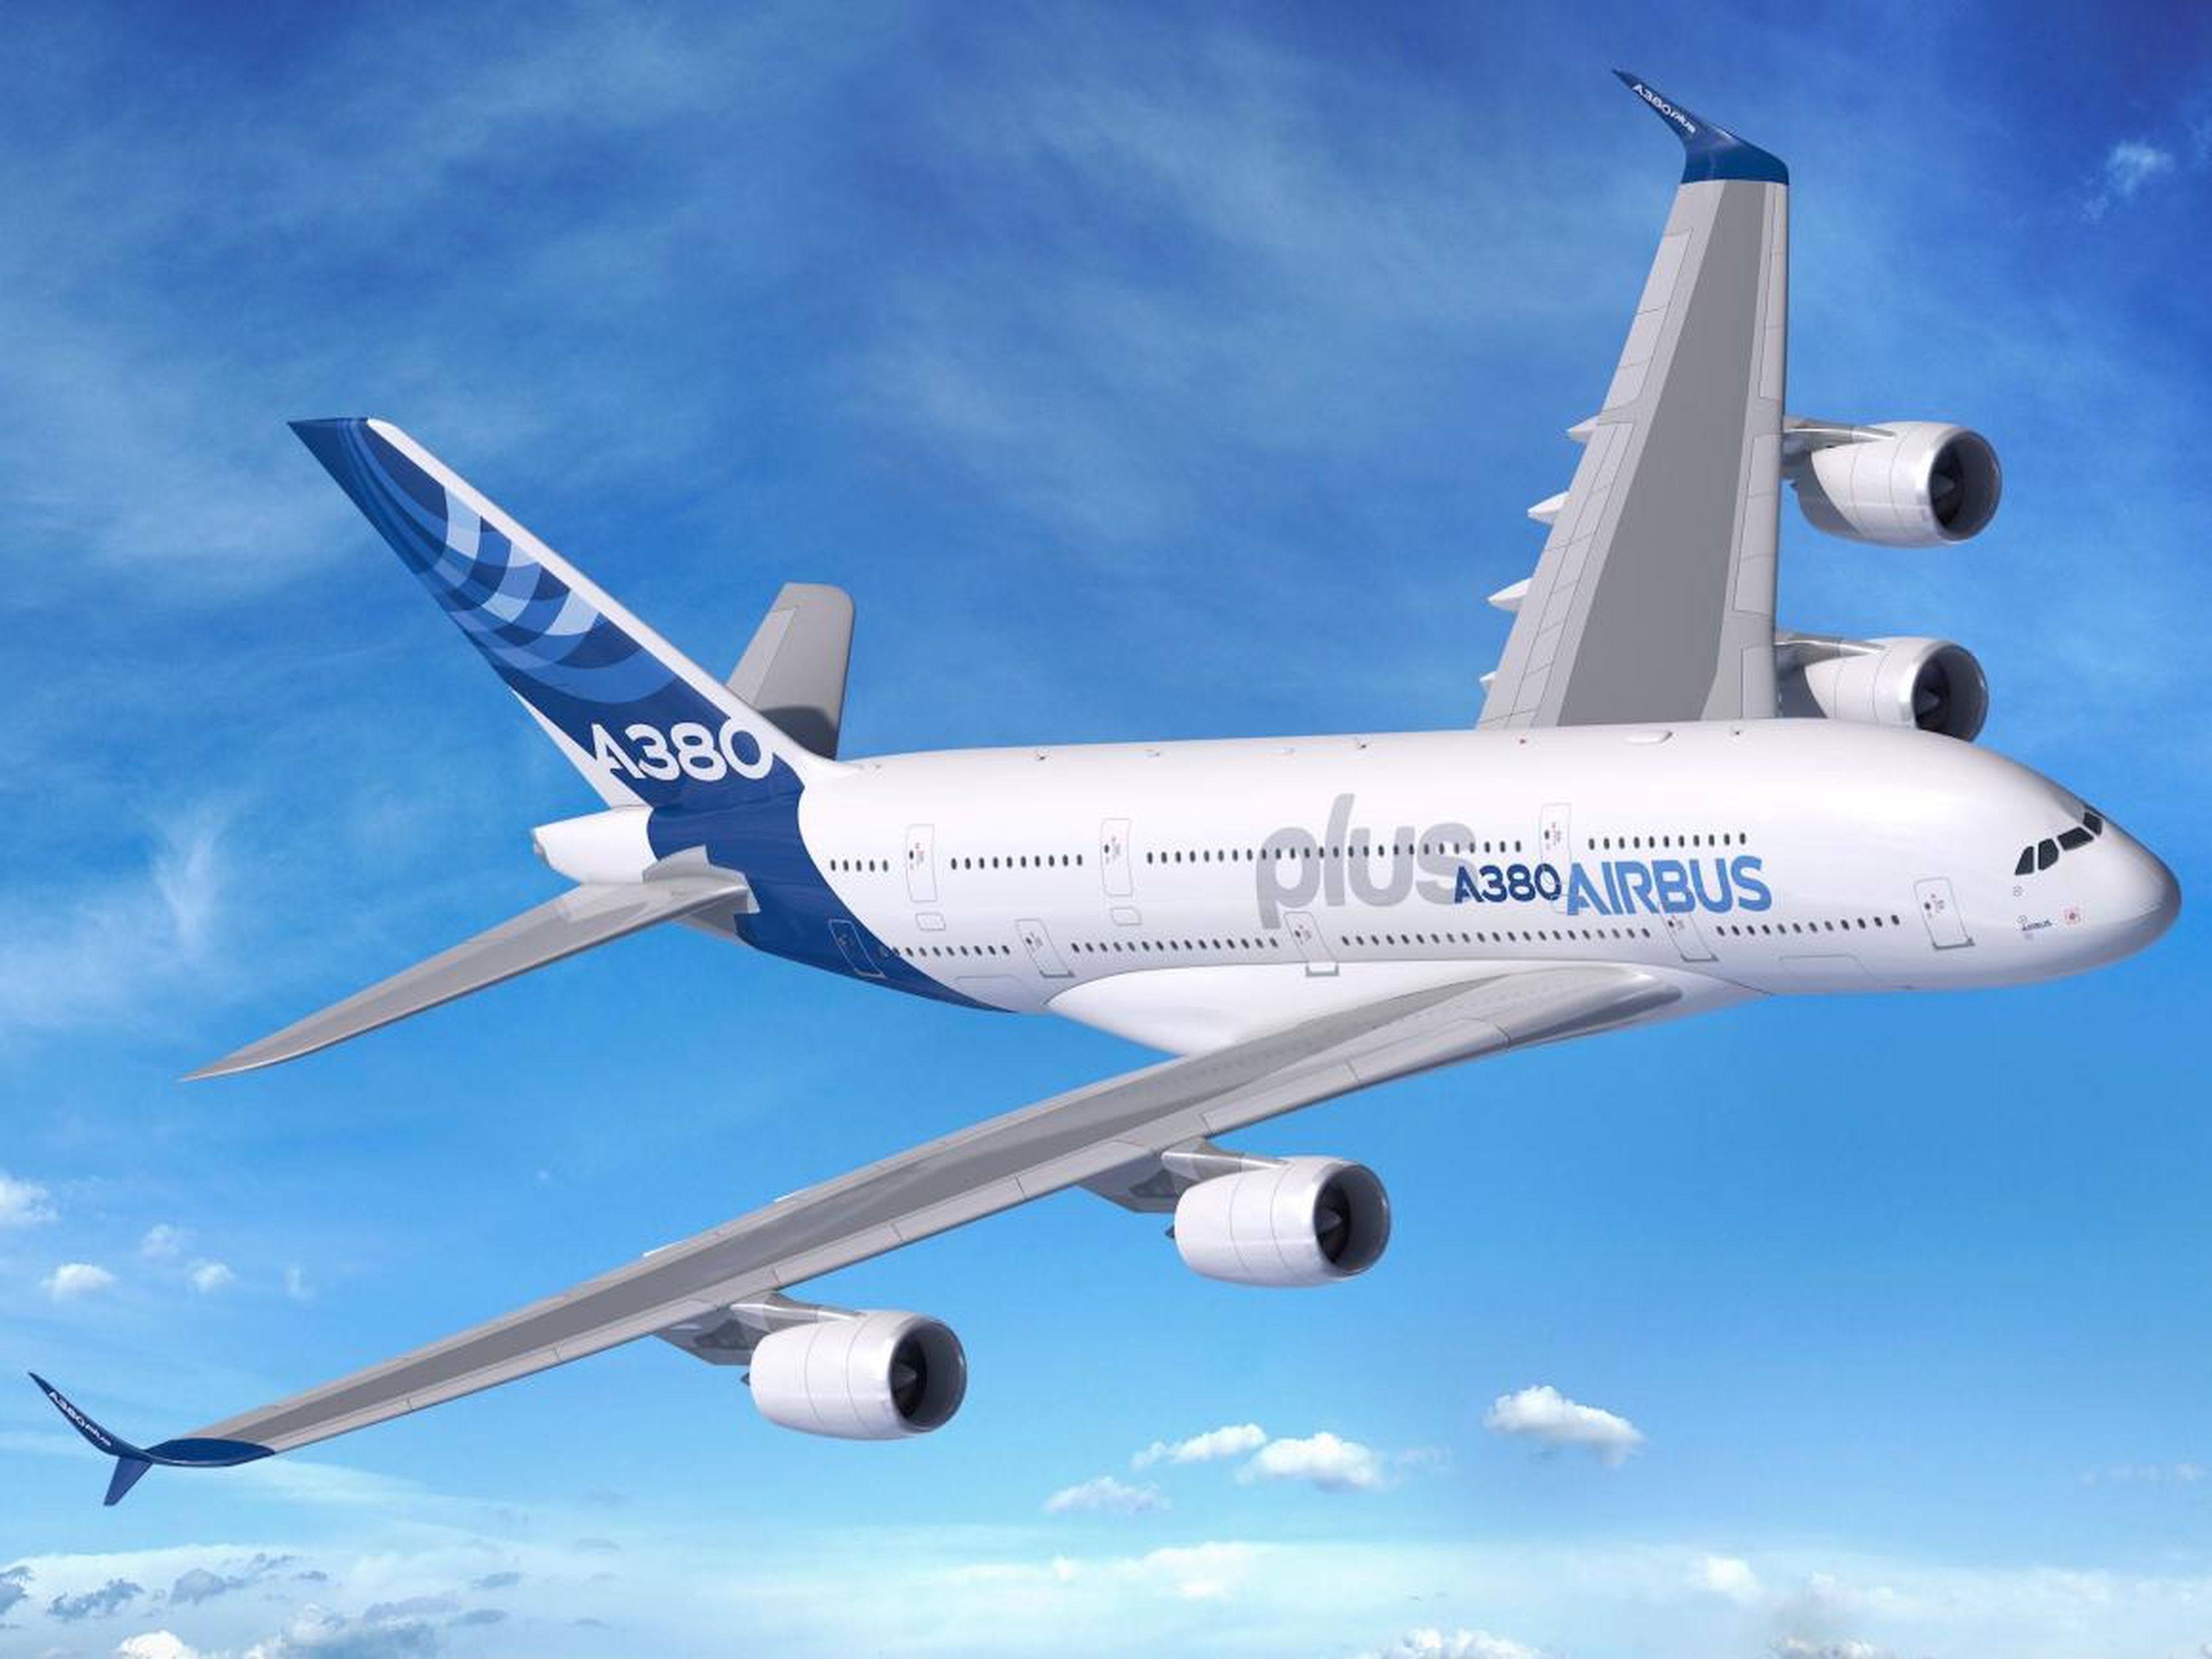 Airbus has been reluctant to invest the kind of money needed to develop a new version of the A380. In 2017, Airbus offered its customers a moderately updated version of the plane, called the A380 Plus, with room for 80 more people